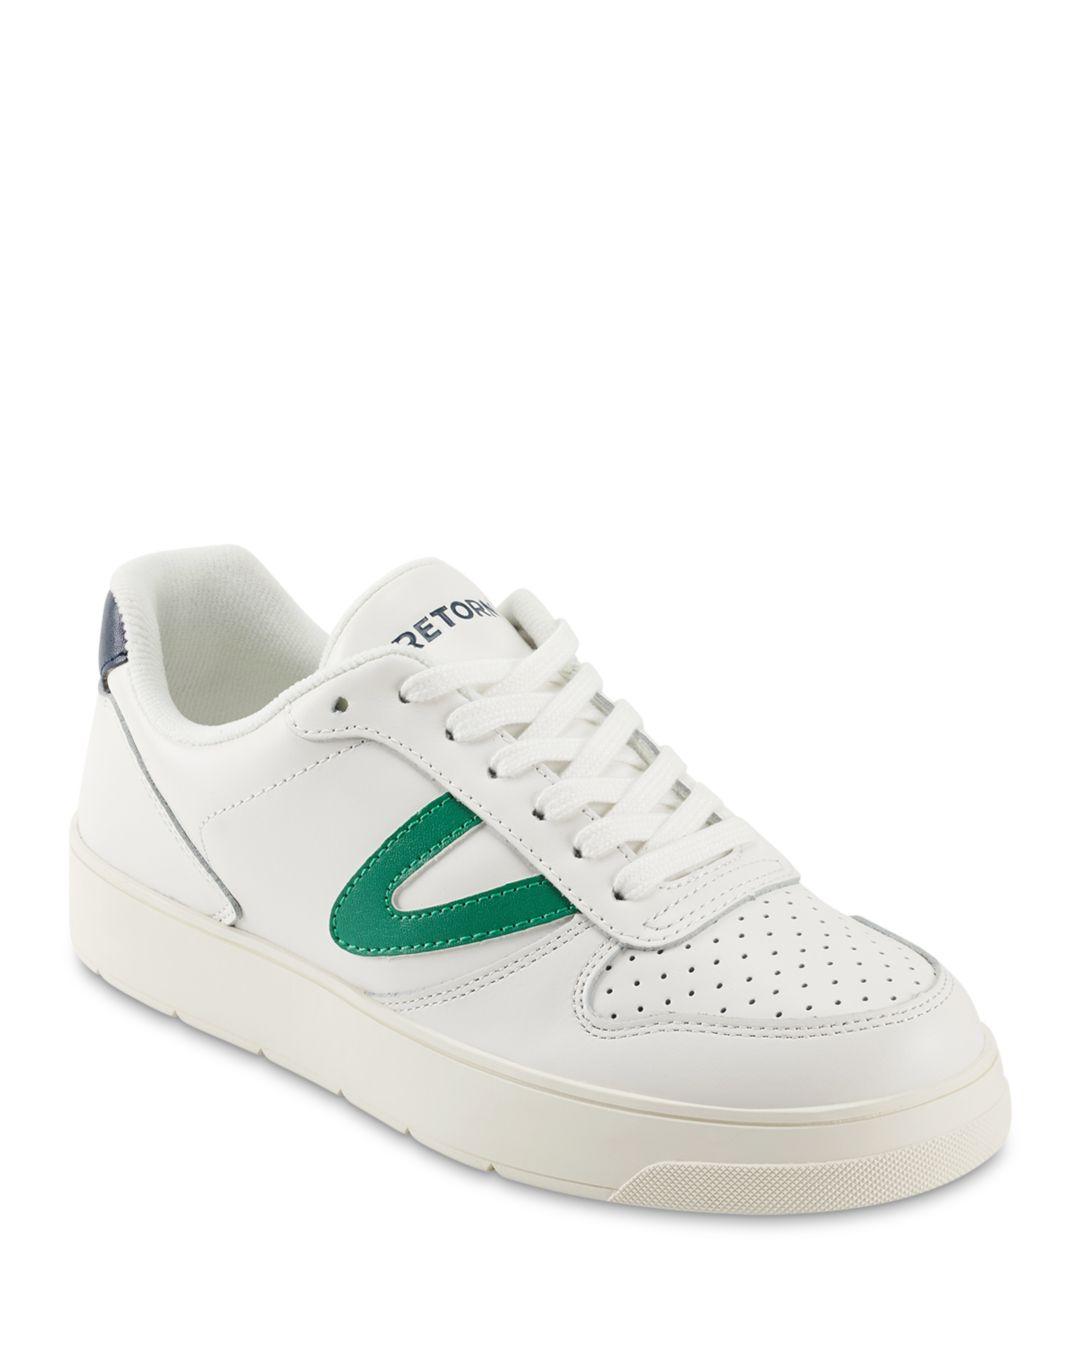 Tretorn Leather Women's Harlow 2 Lace Up Sneakers in White/Green (White) -  Lyst